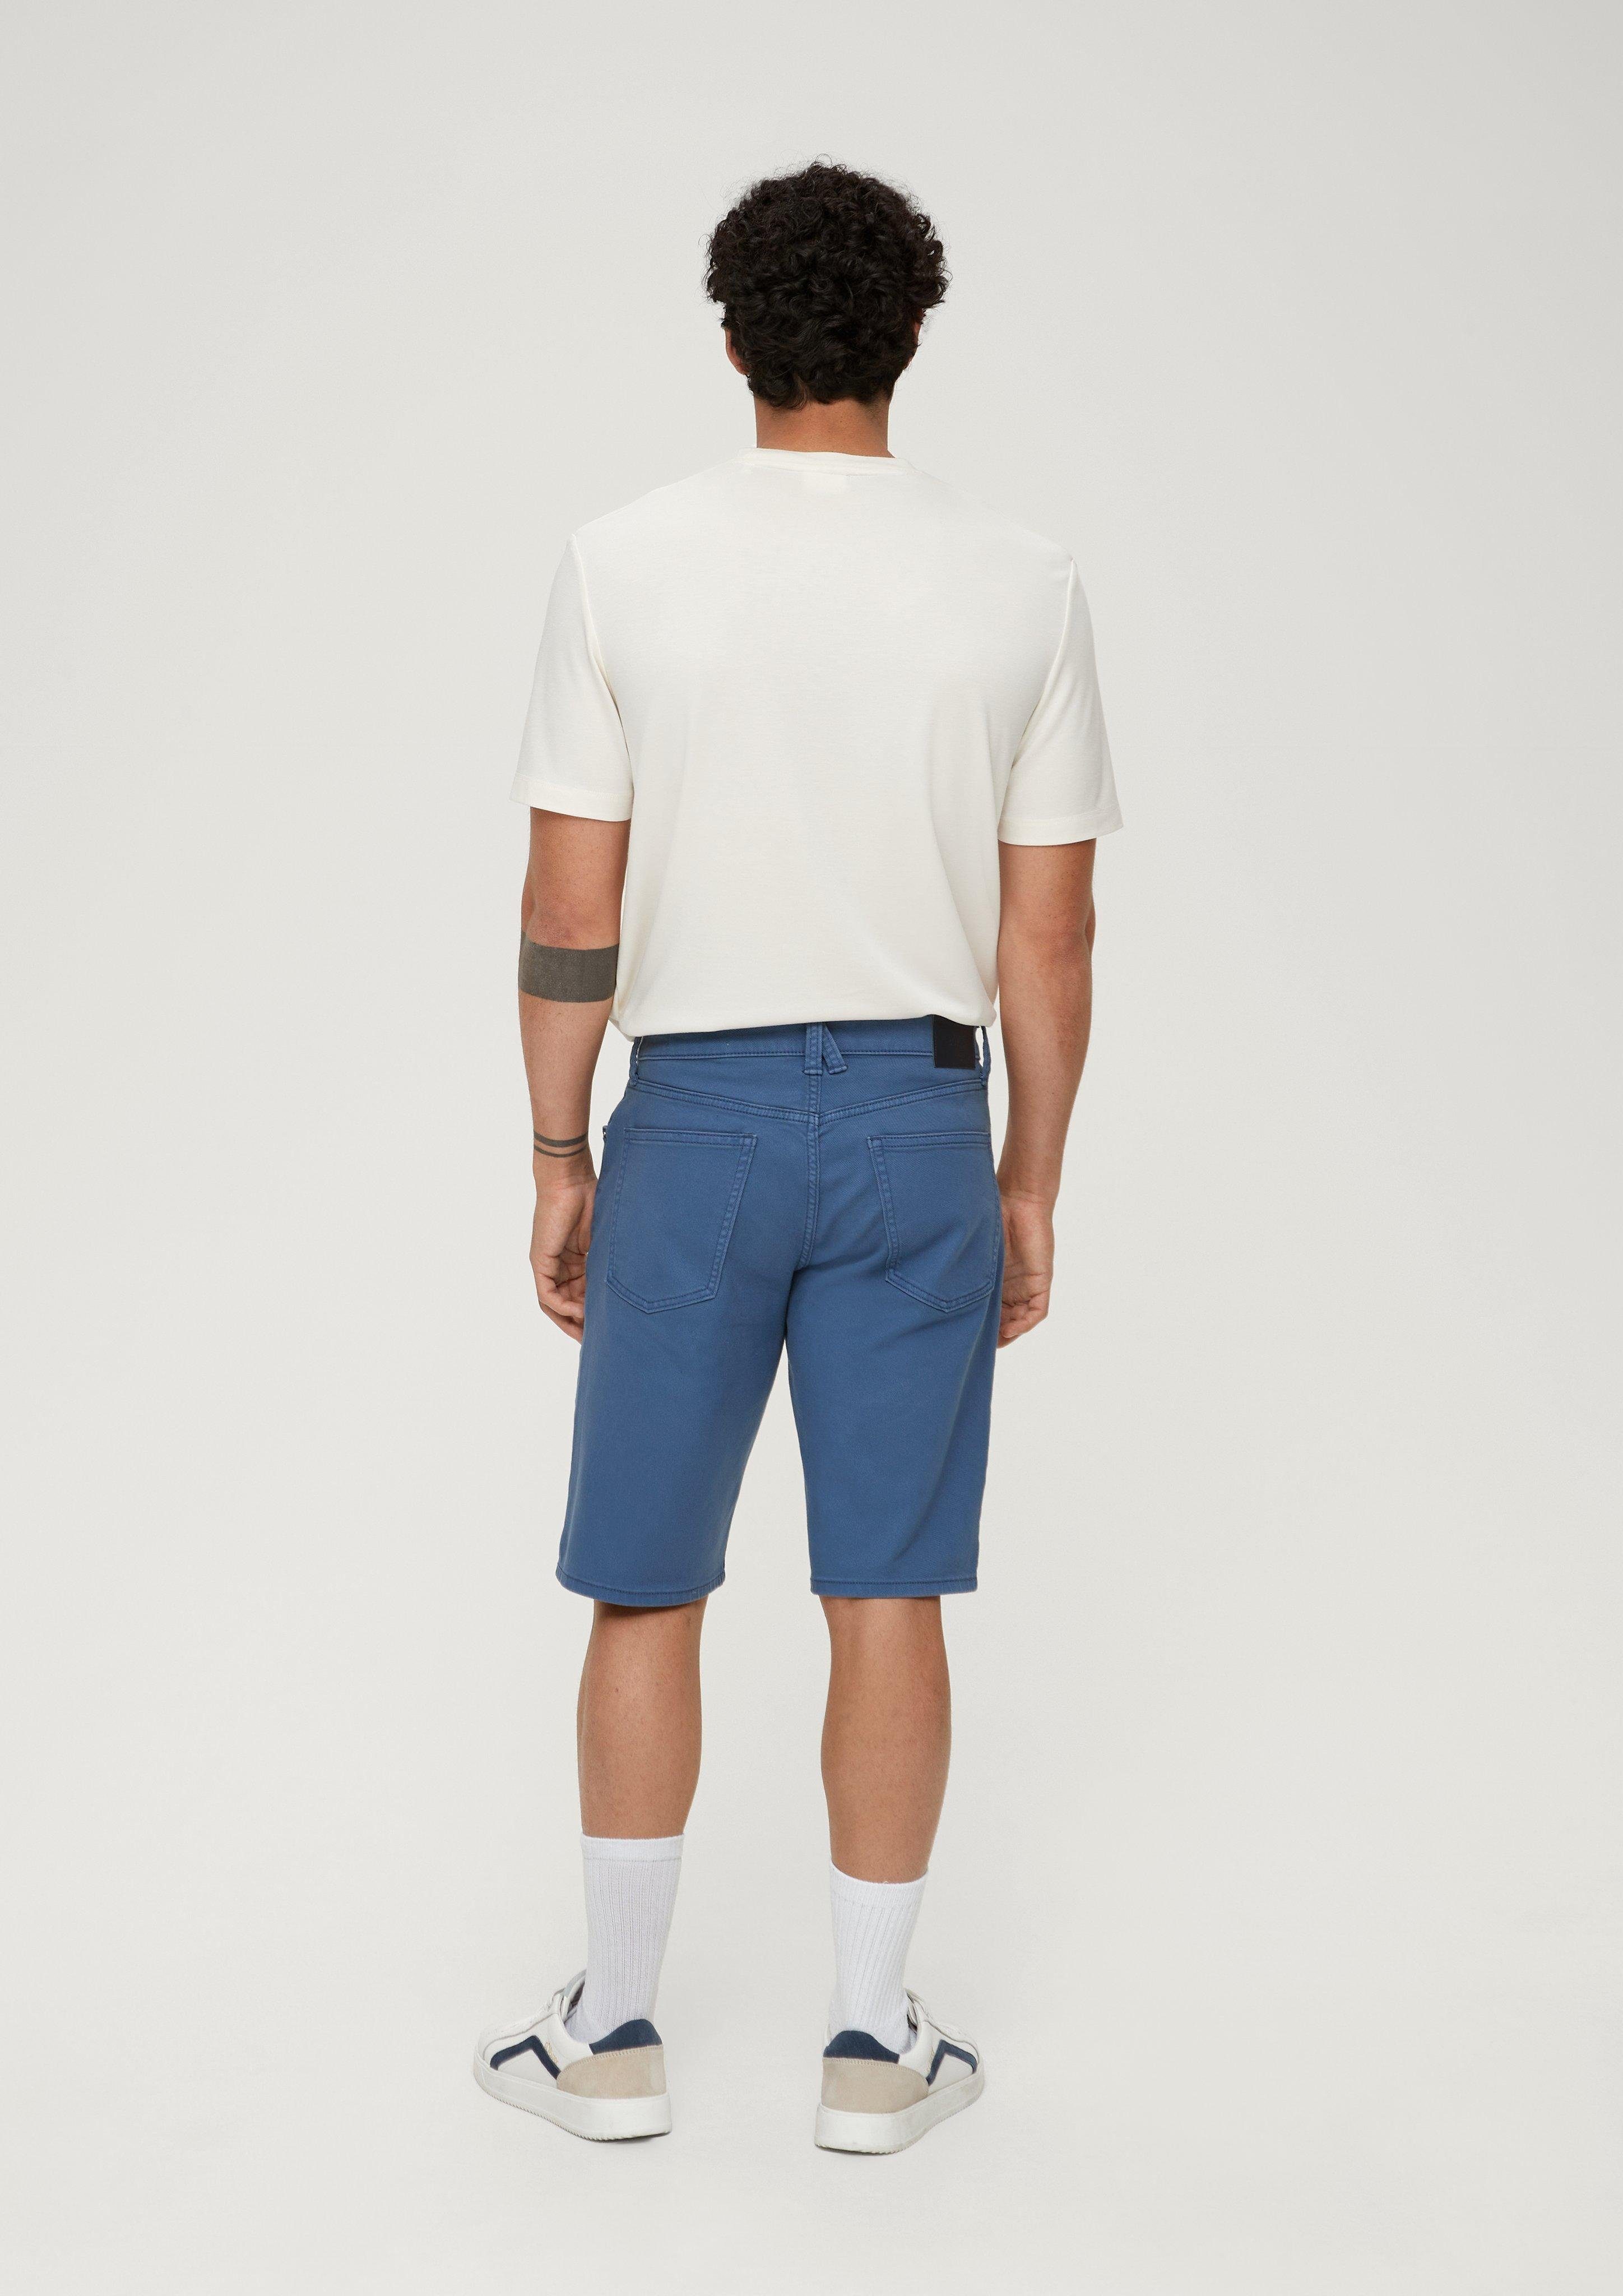 Straight Fit High Leg / s.Oliver Jeansshorts Jeans-Shorts / blau Label-Patch Regular / Rise